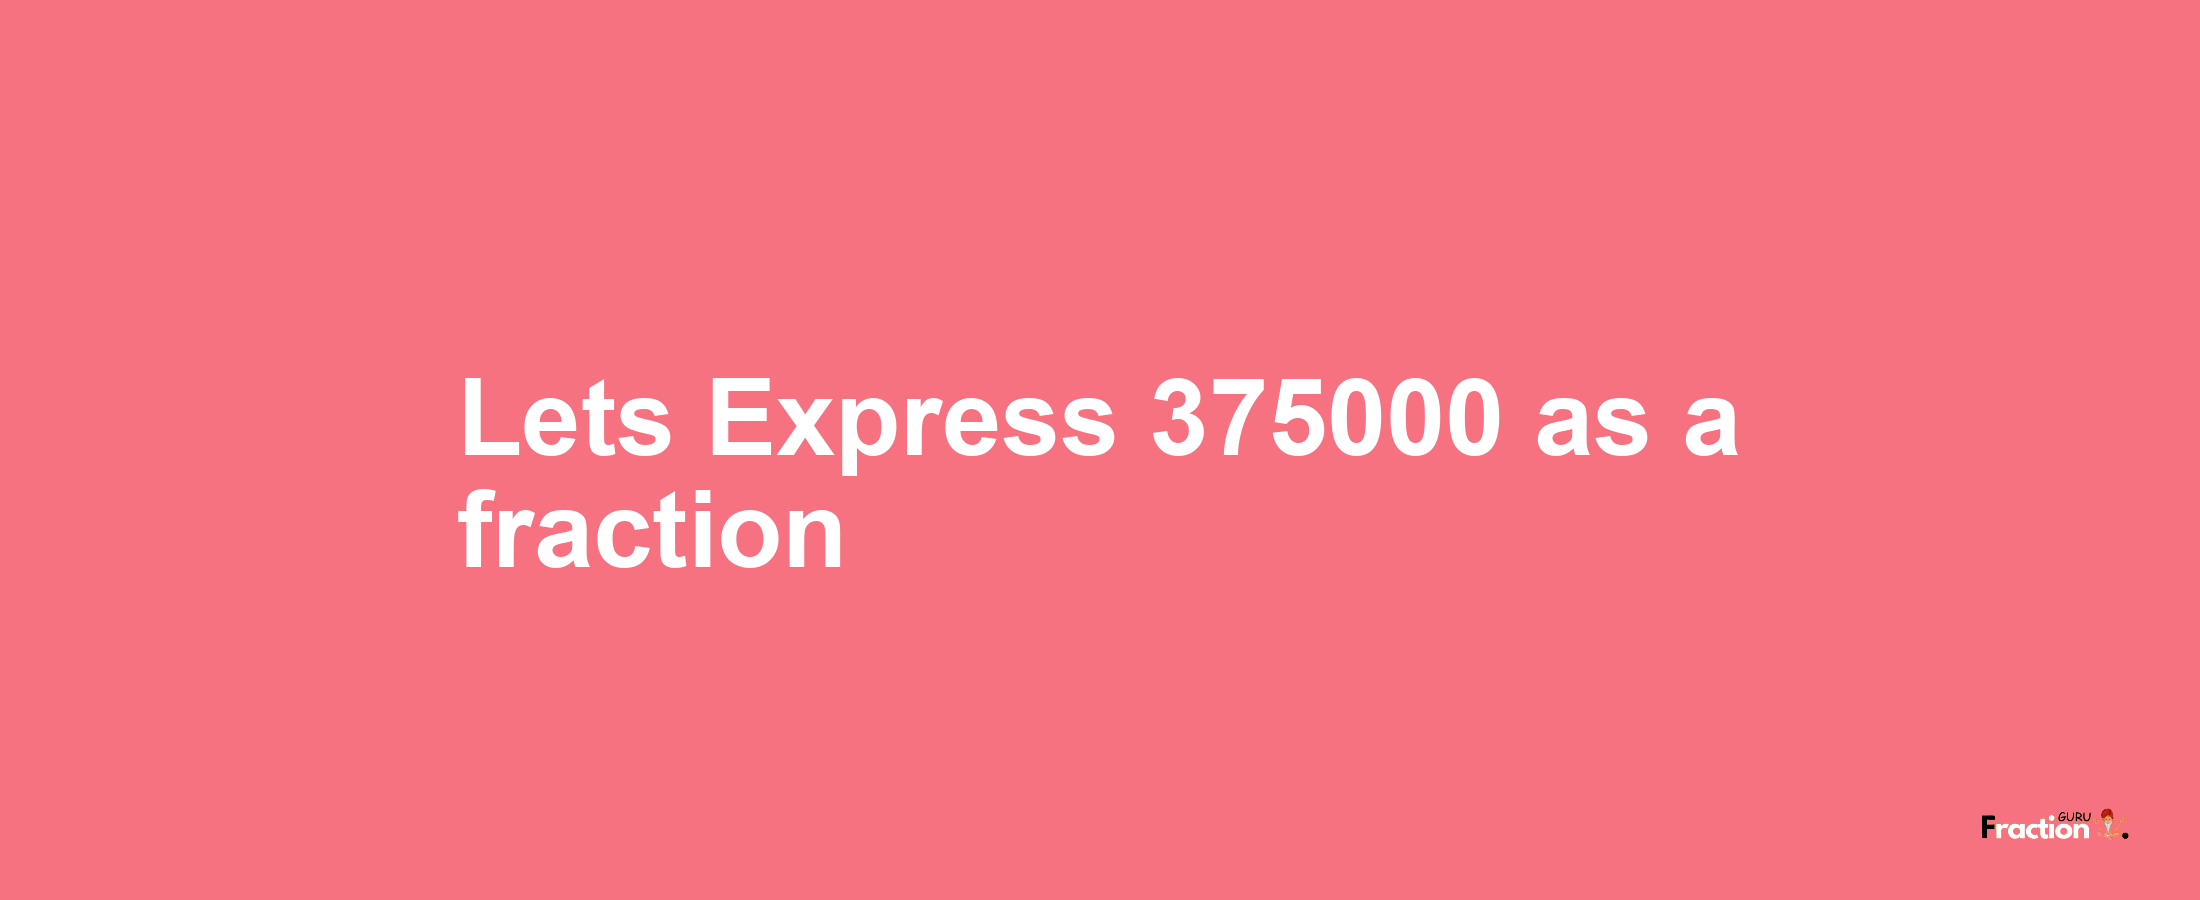 Lets Express 375000 as afraction